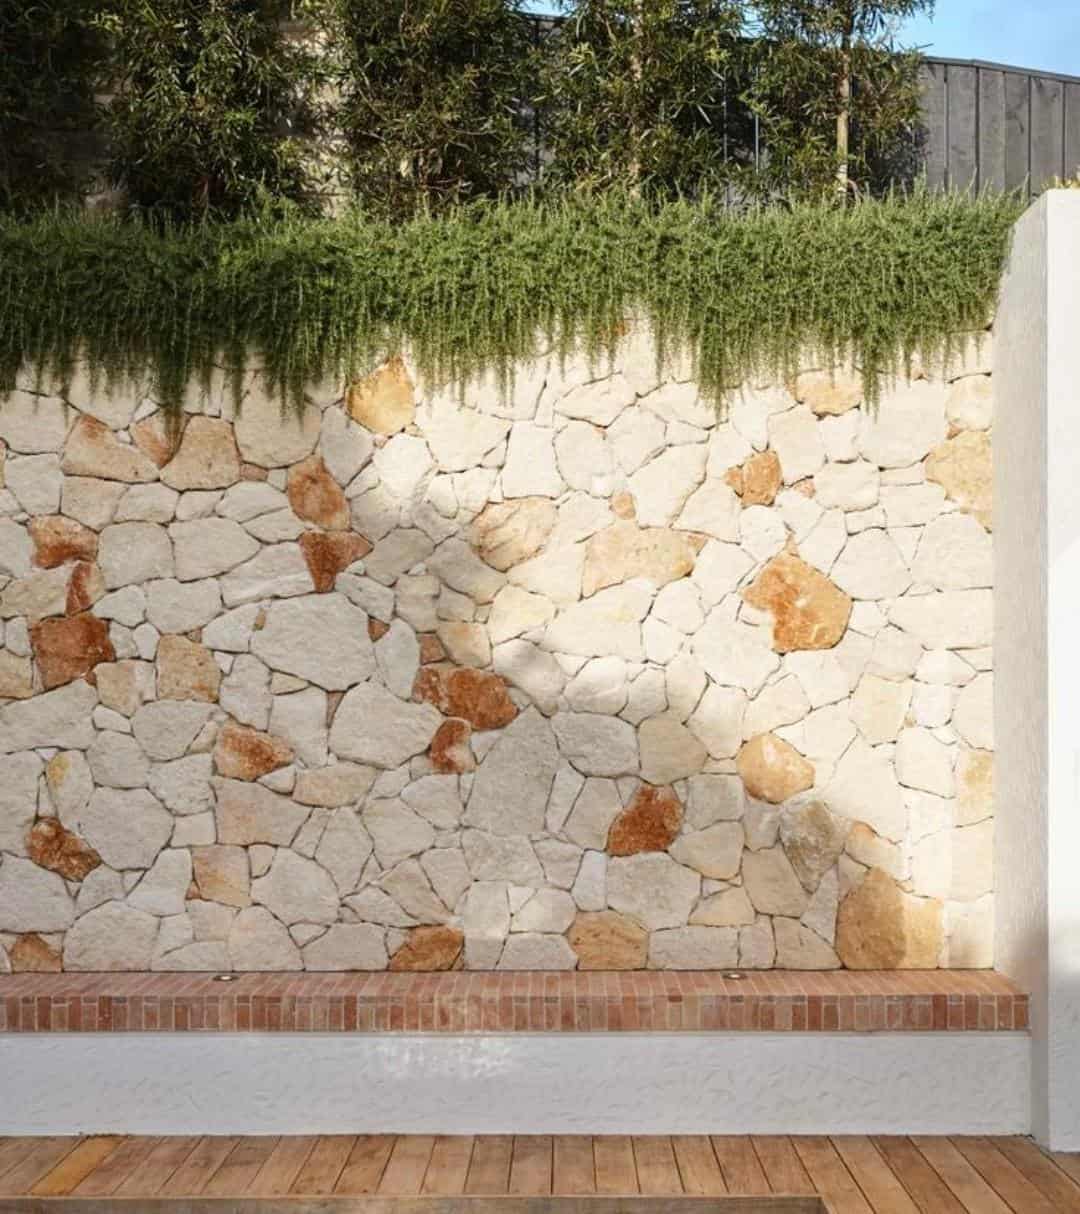 Stunning Exterior Stone Wall Design Ideas: Point Piper Enclave